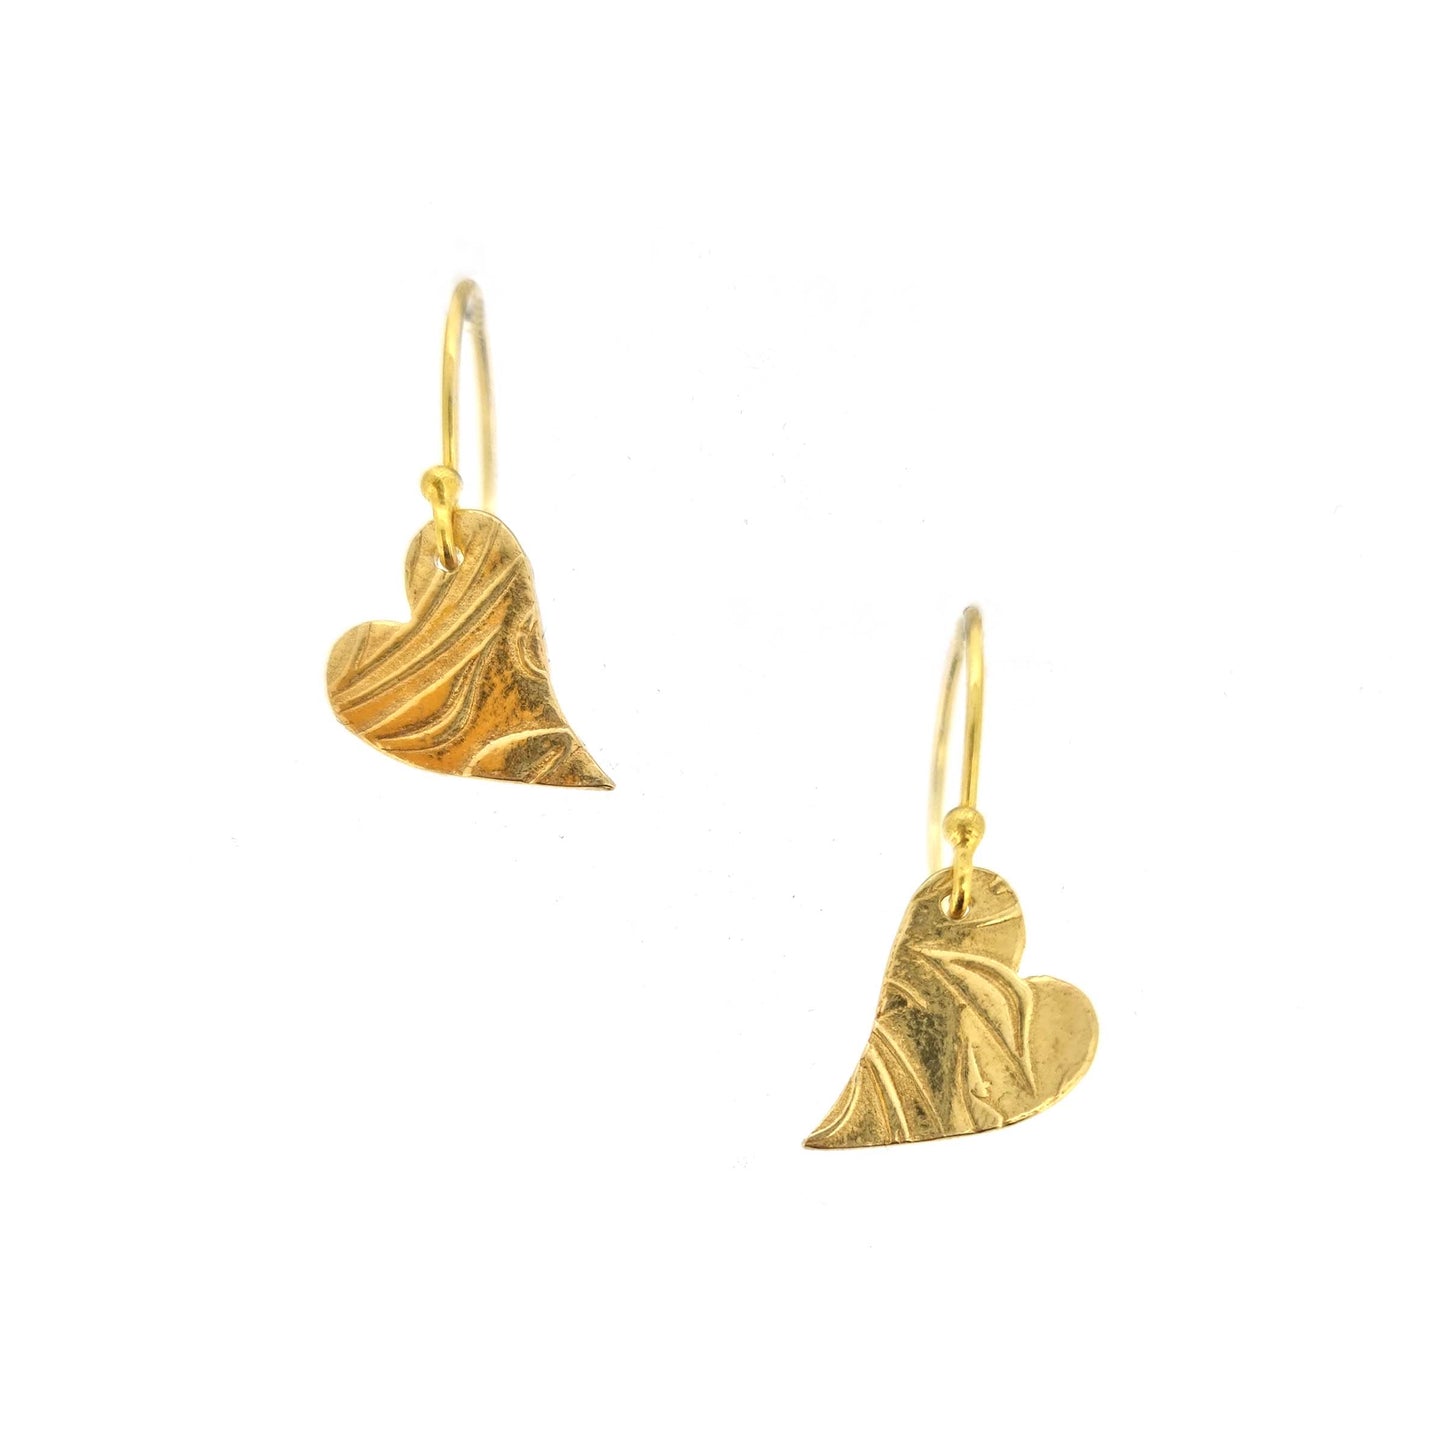 Yellow gold vermeil drop earrings featuring an asymmetrical heart with a leaf vine pattern suspended from an ear wire.